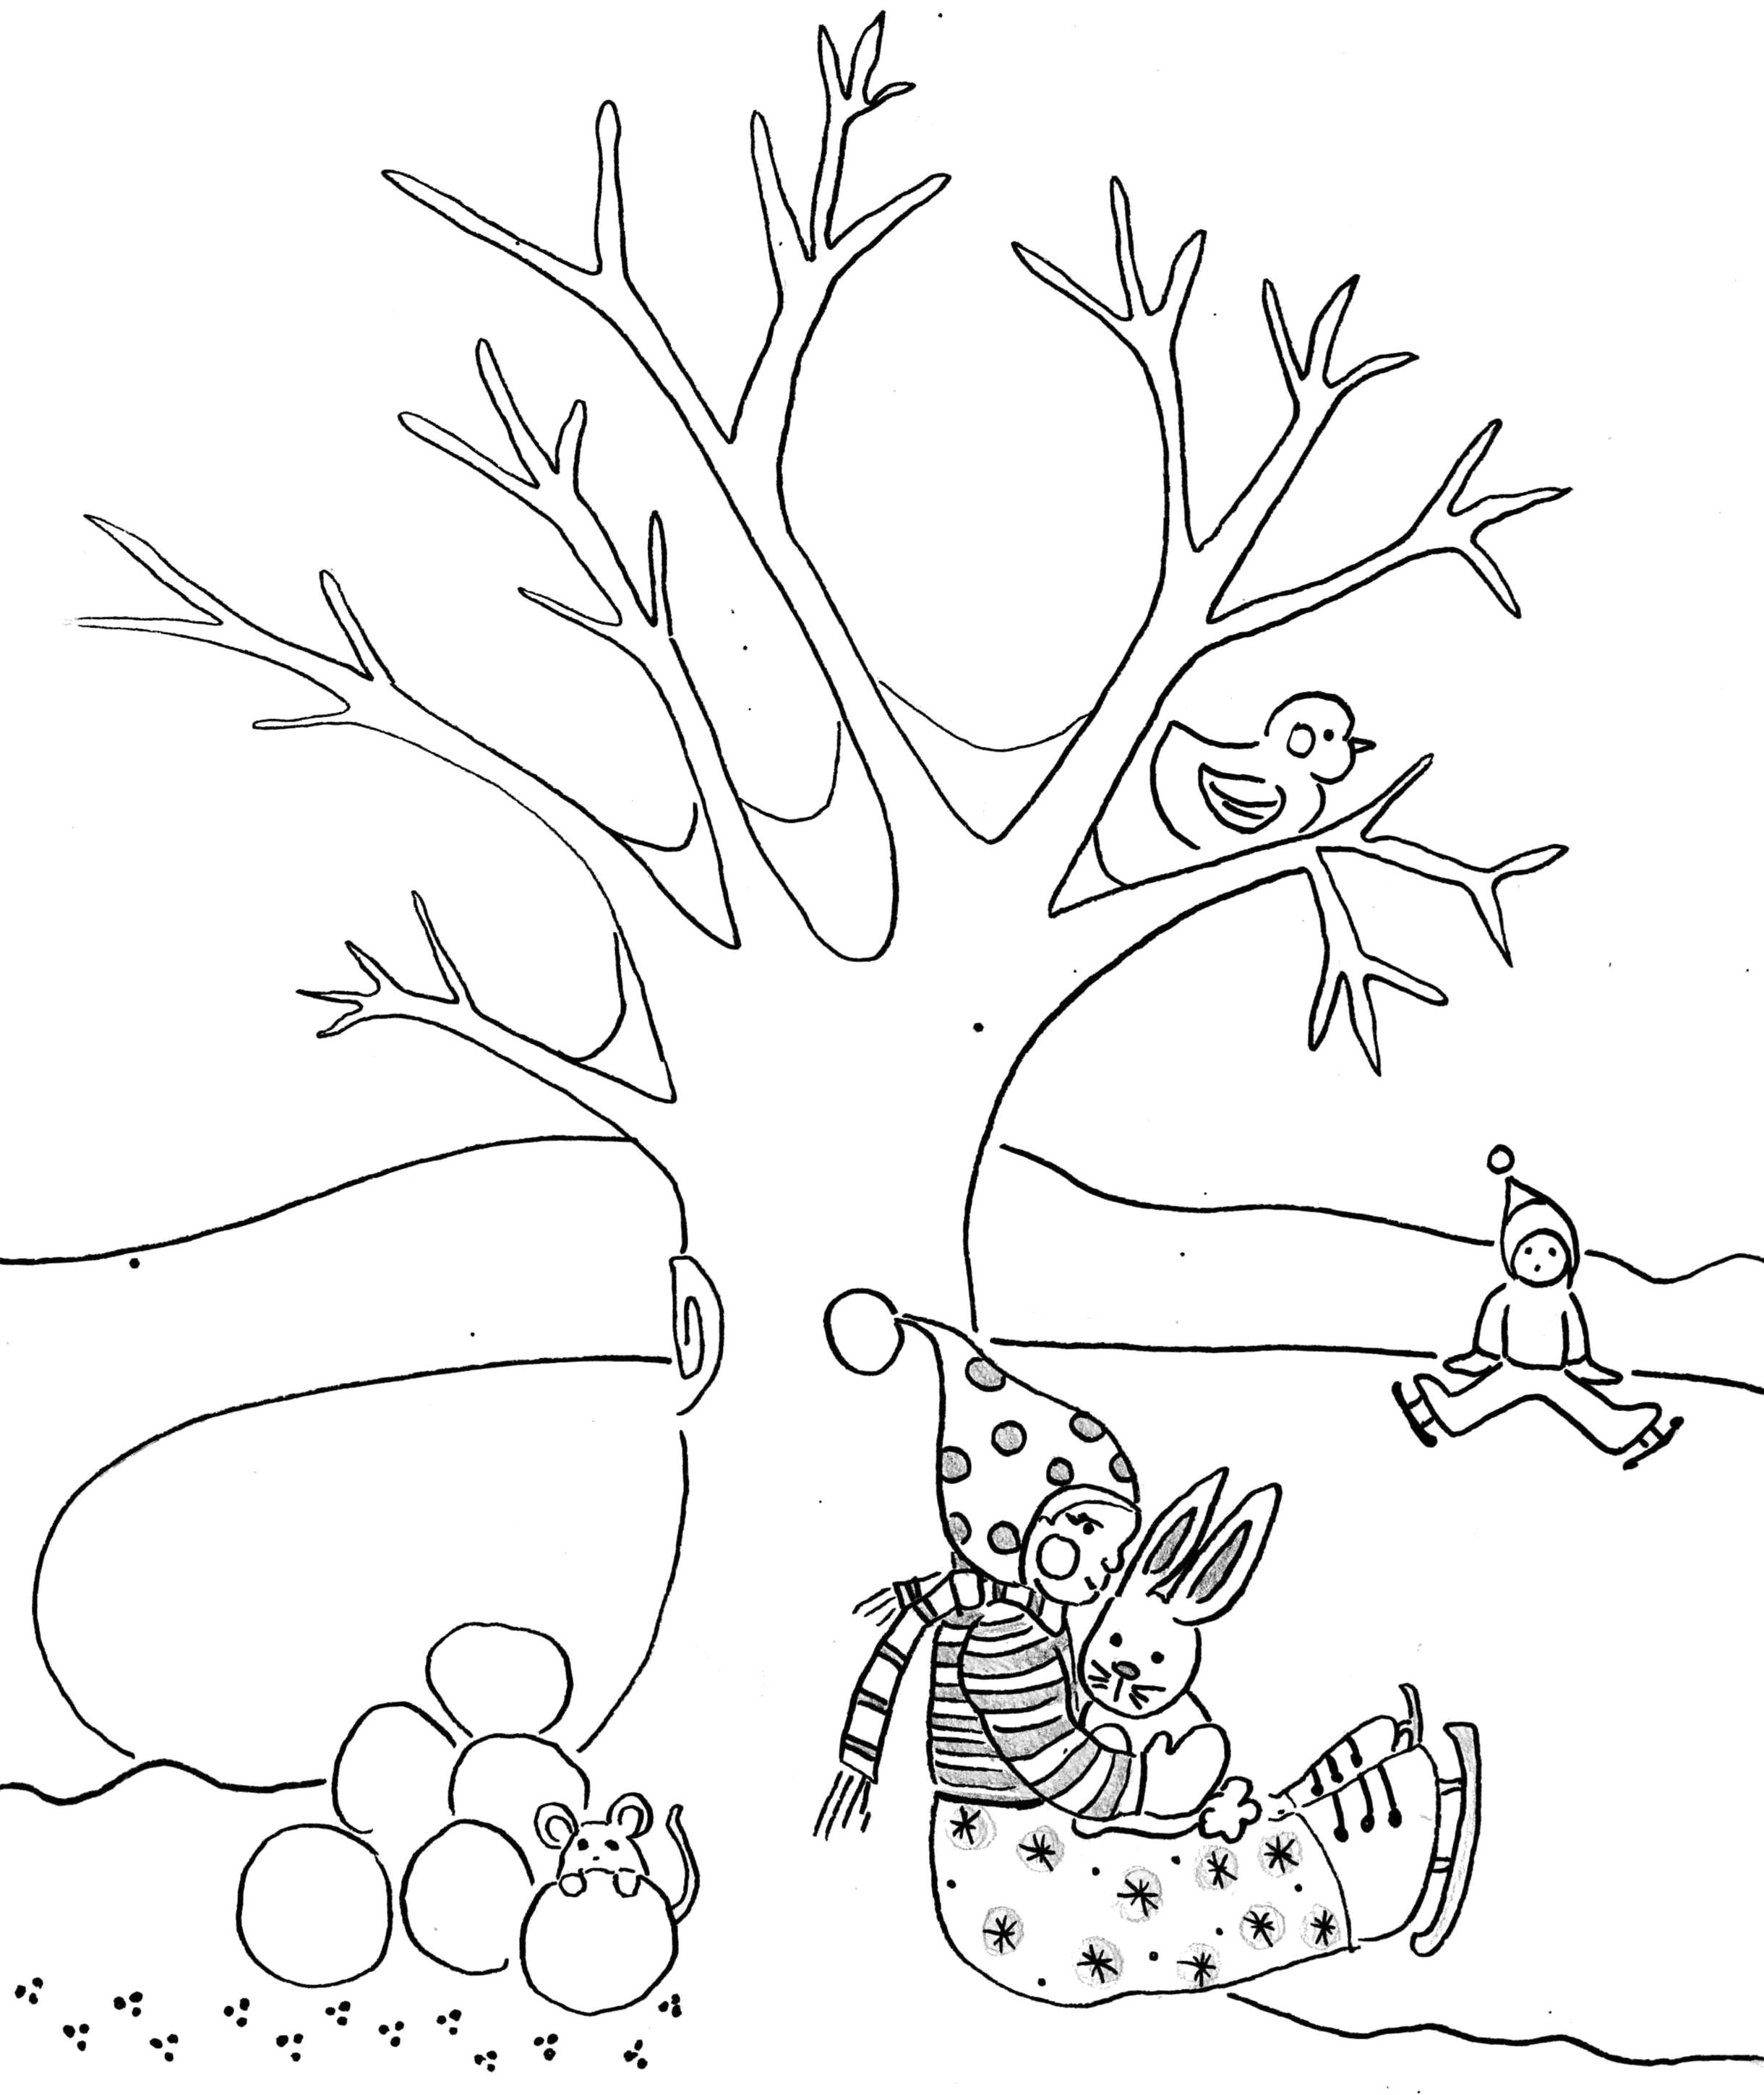 Winter Tree Coloring Page at Free printable